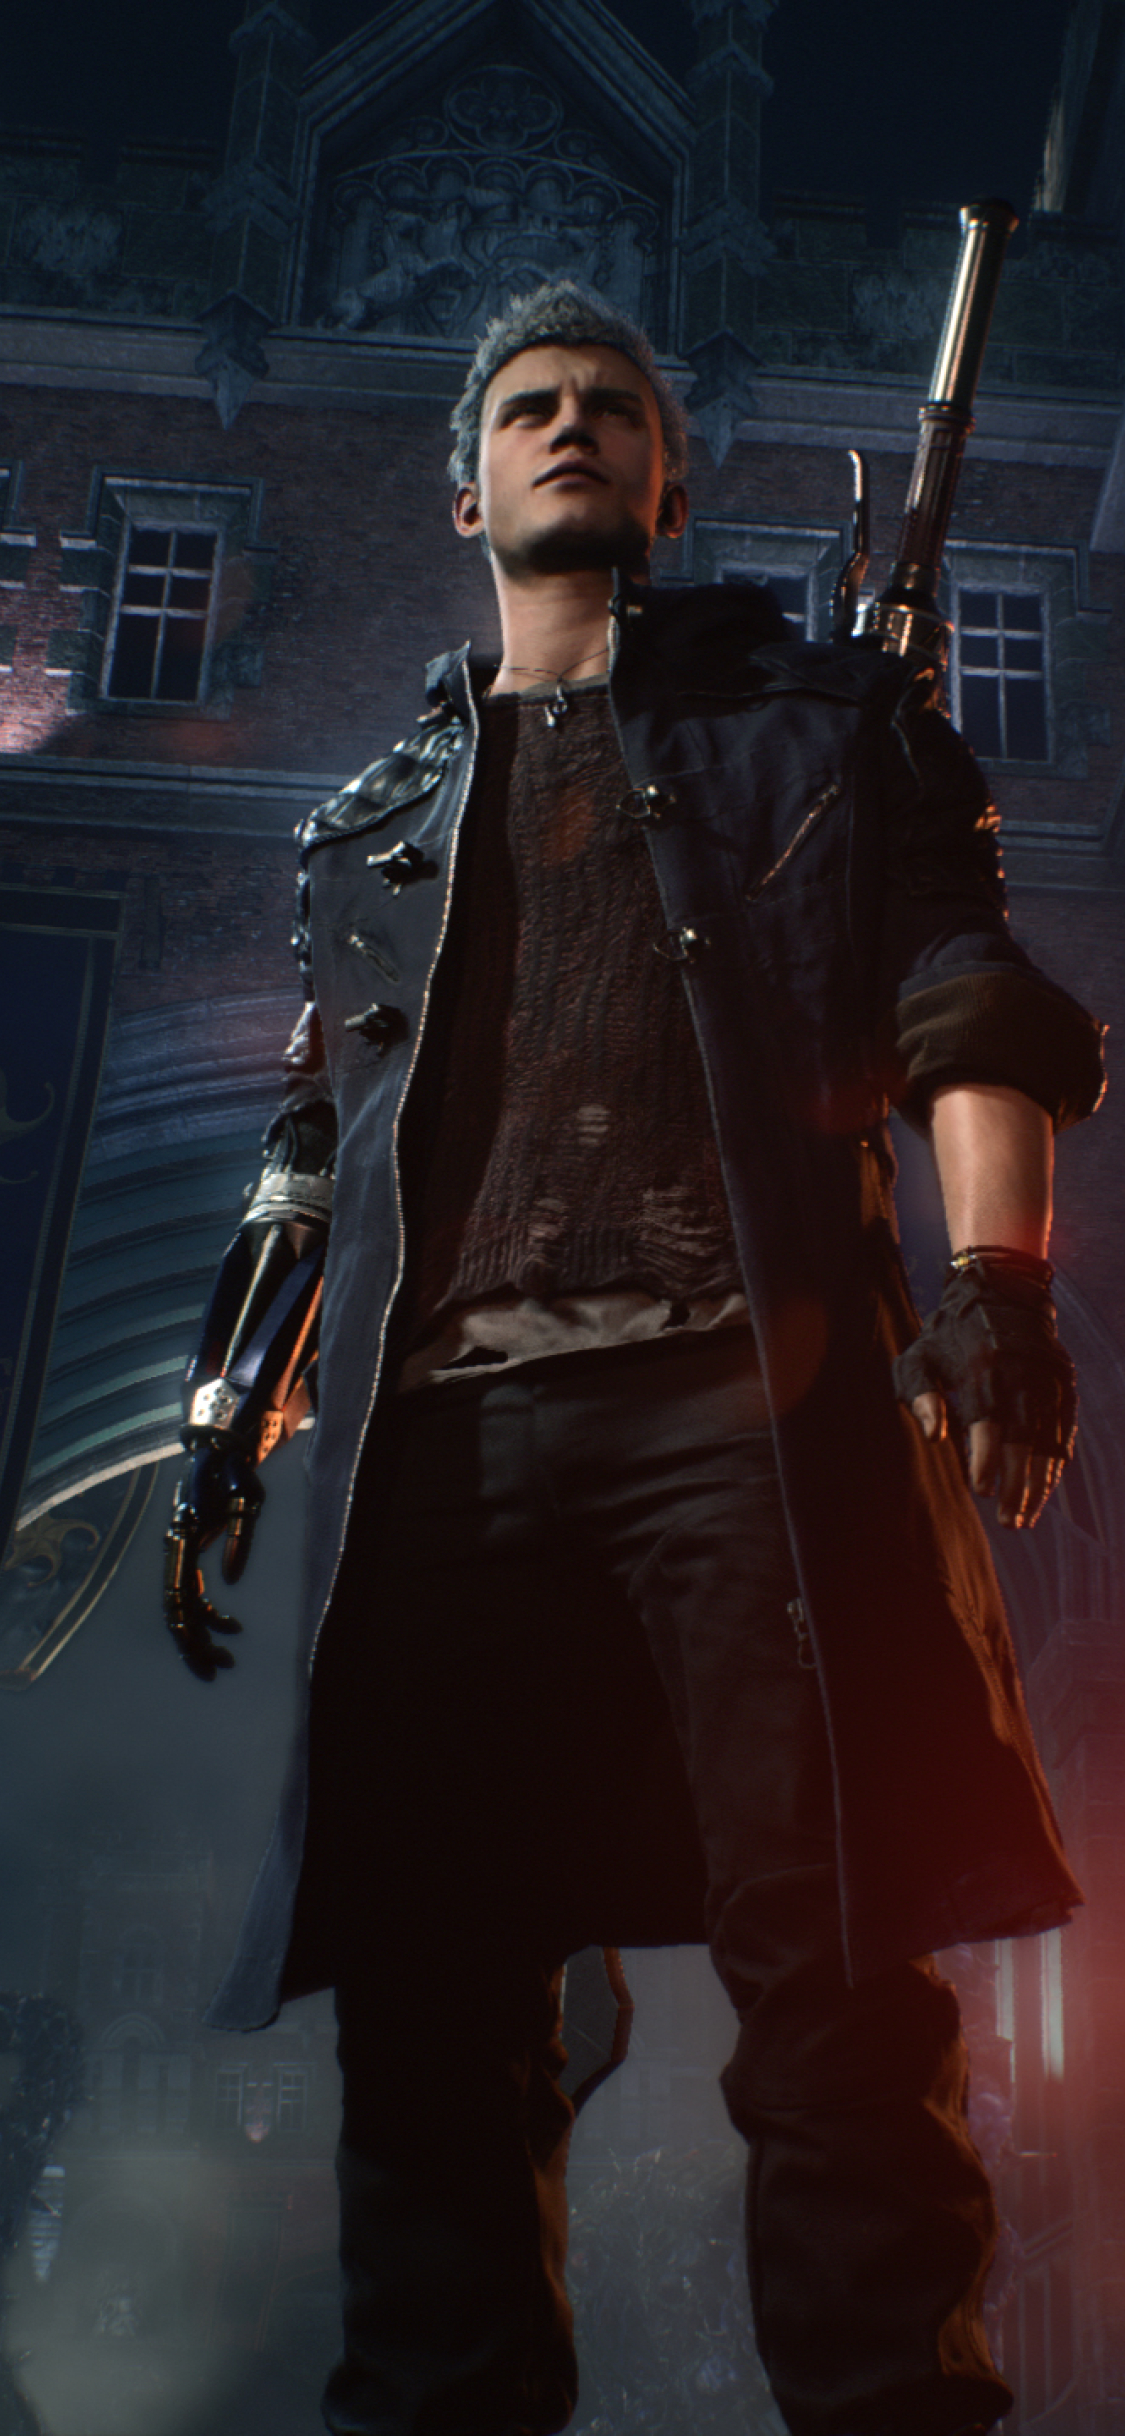 1125x2436 Nero Devil May Cry 5 Iphone Xs Iphone 10 Iphone X Wallpaper Hd Games 4k Wallpapers Images Photos And Background Wallpapers Den